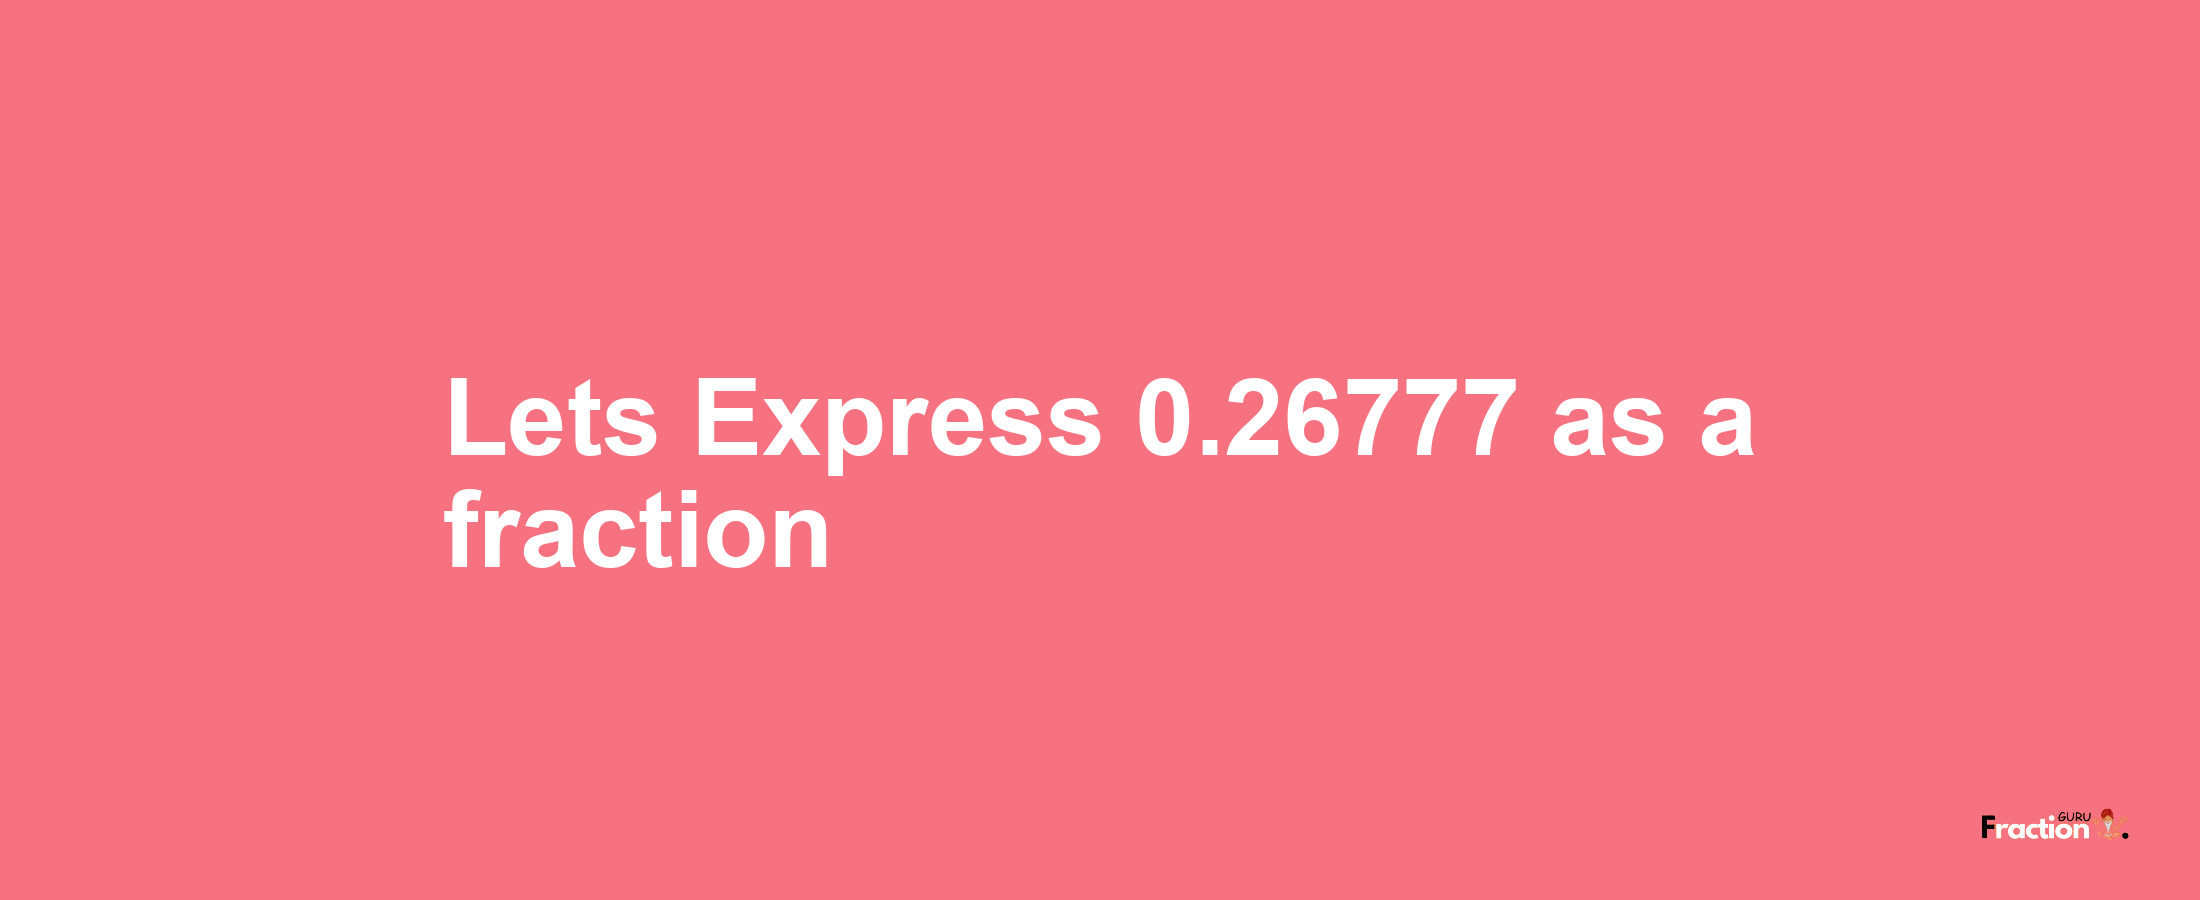 Lets Express 0.26777 as afraction